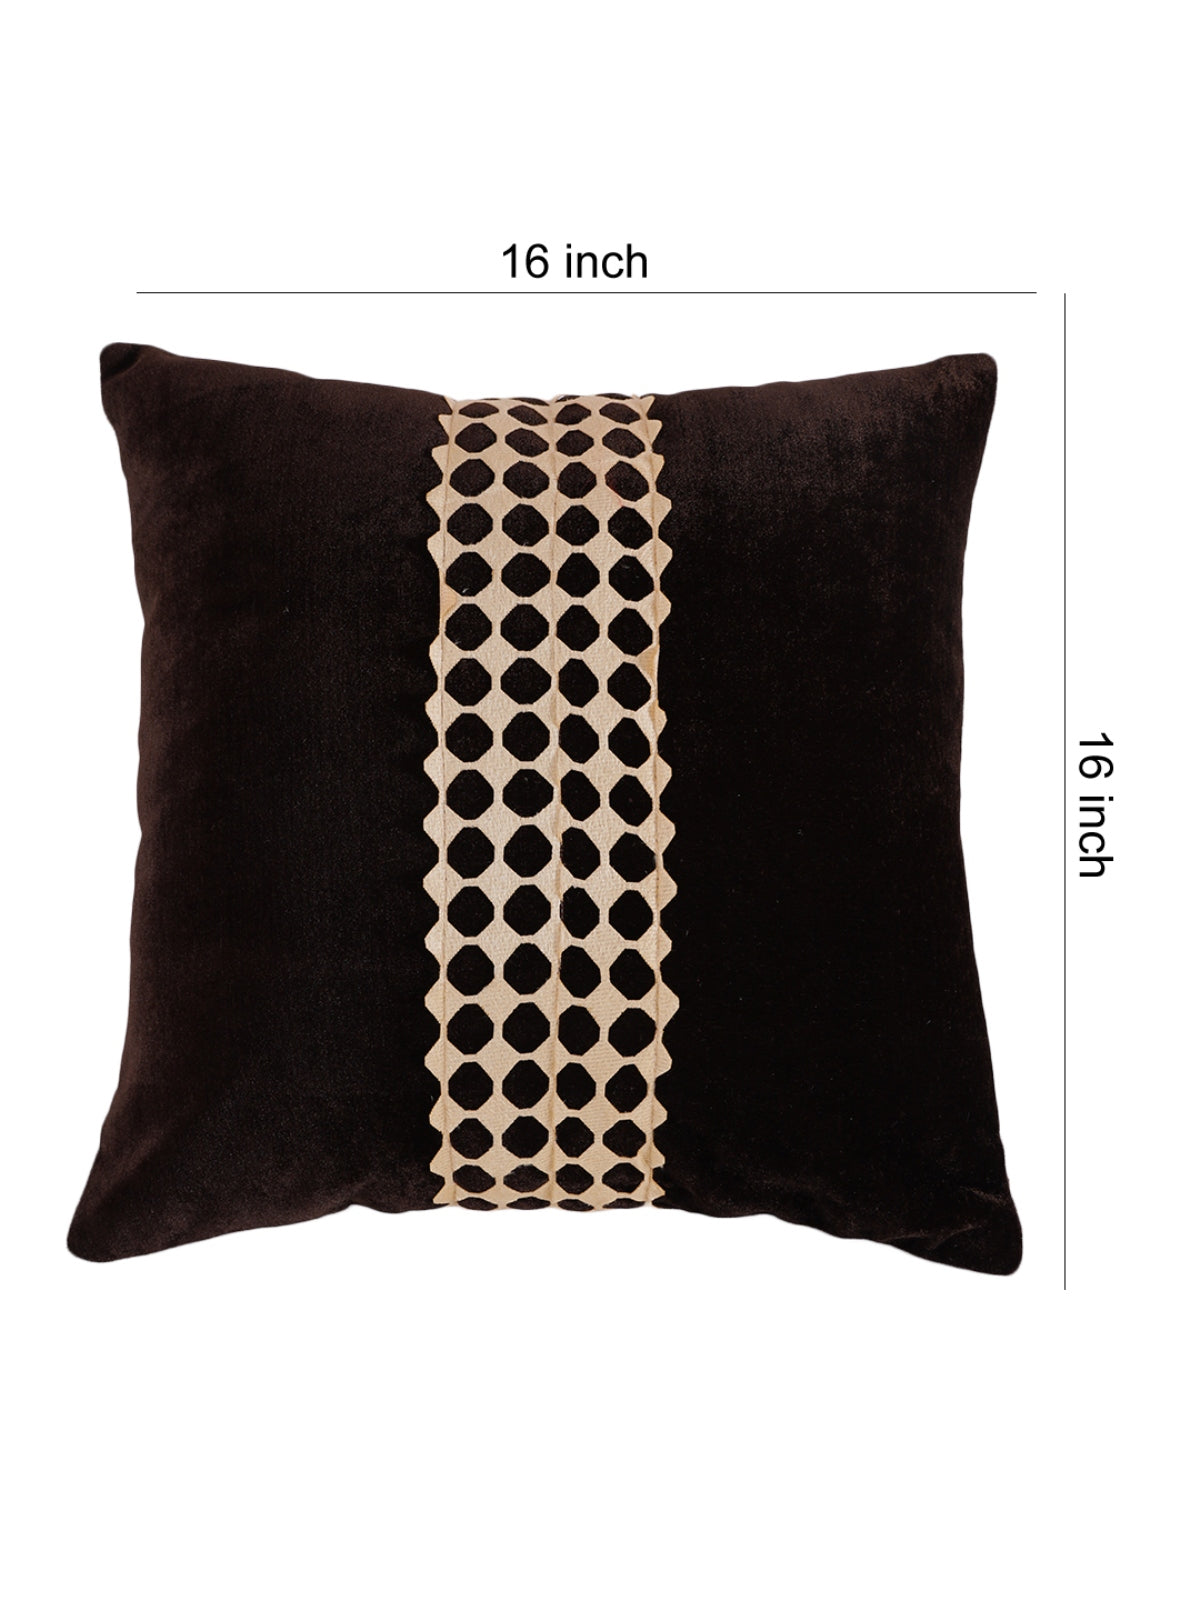 Coffee Brown Set of 5 Velvet 16 Inch x 16 Inch Cushion Covers